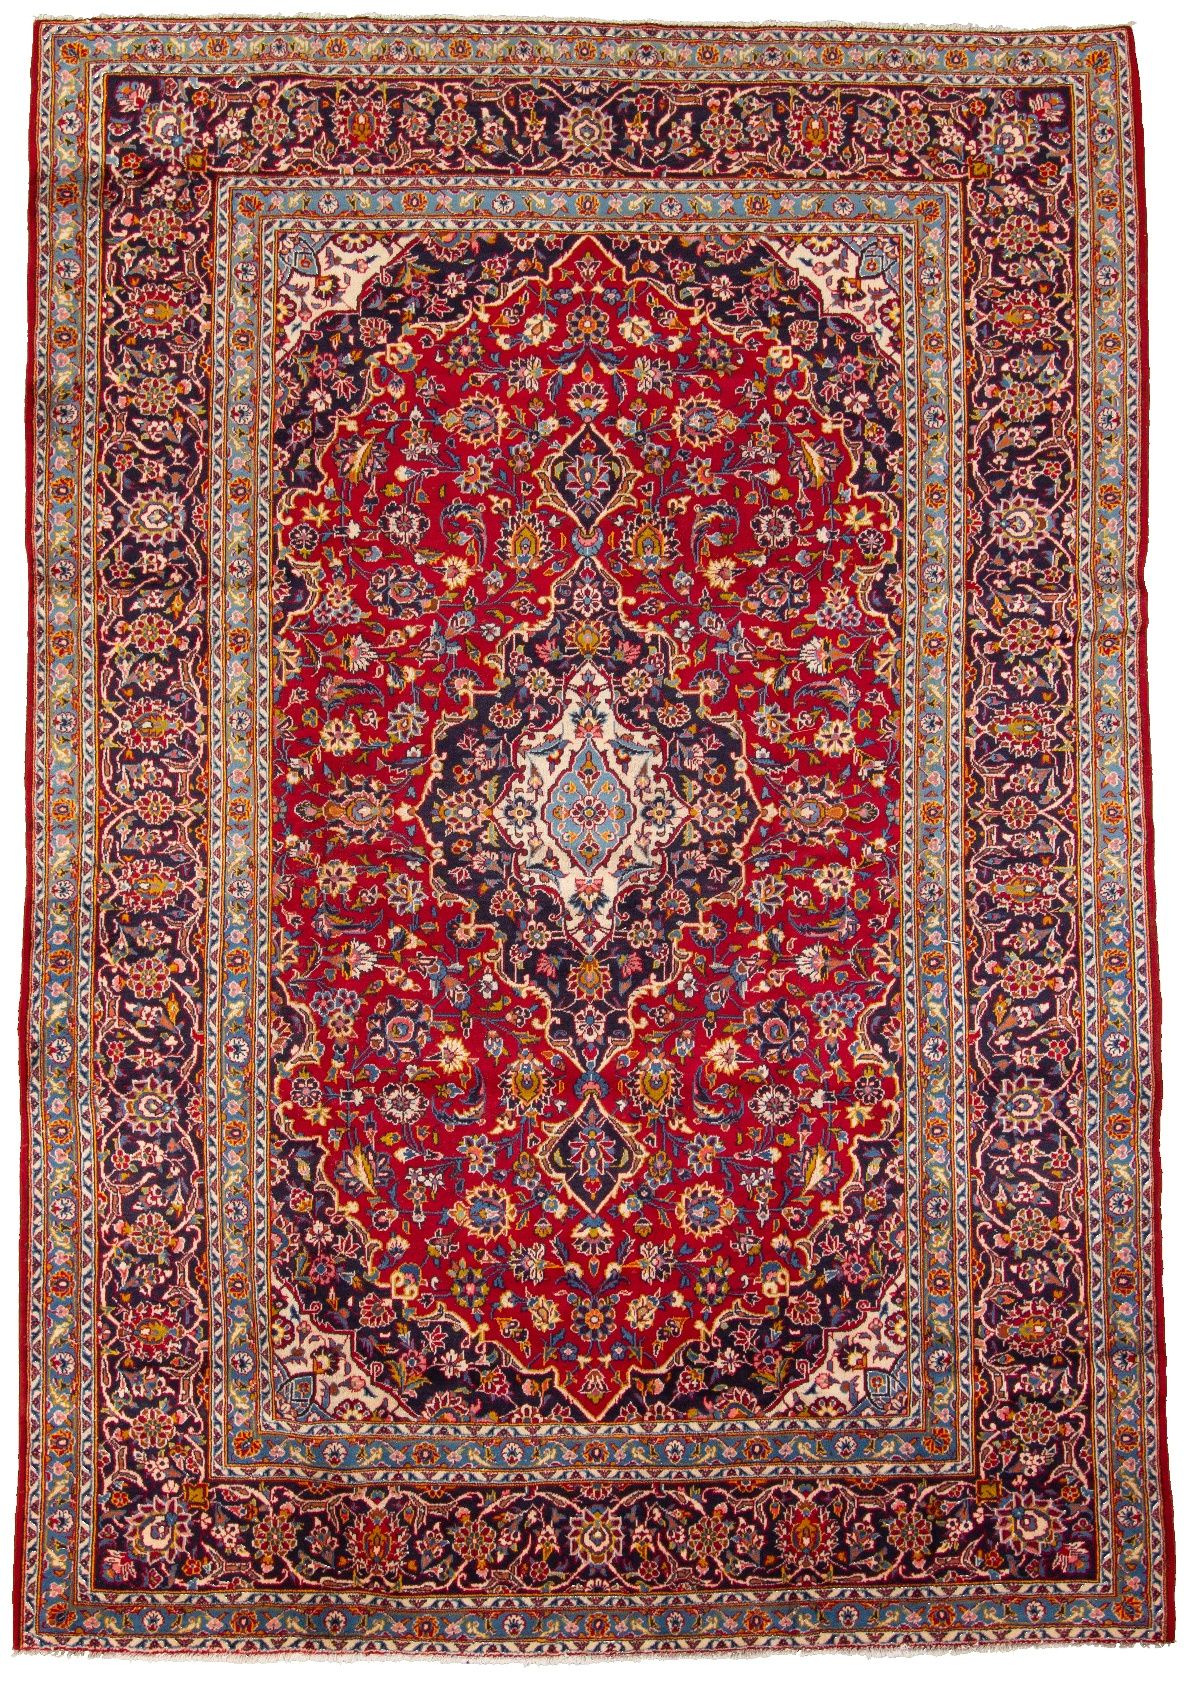 Hand-knotted Kashan  Wool Rug 8'2" x 8'6" Size: 8'2" x 8'6"  